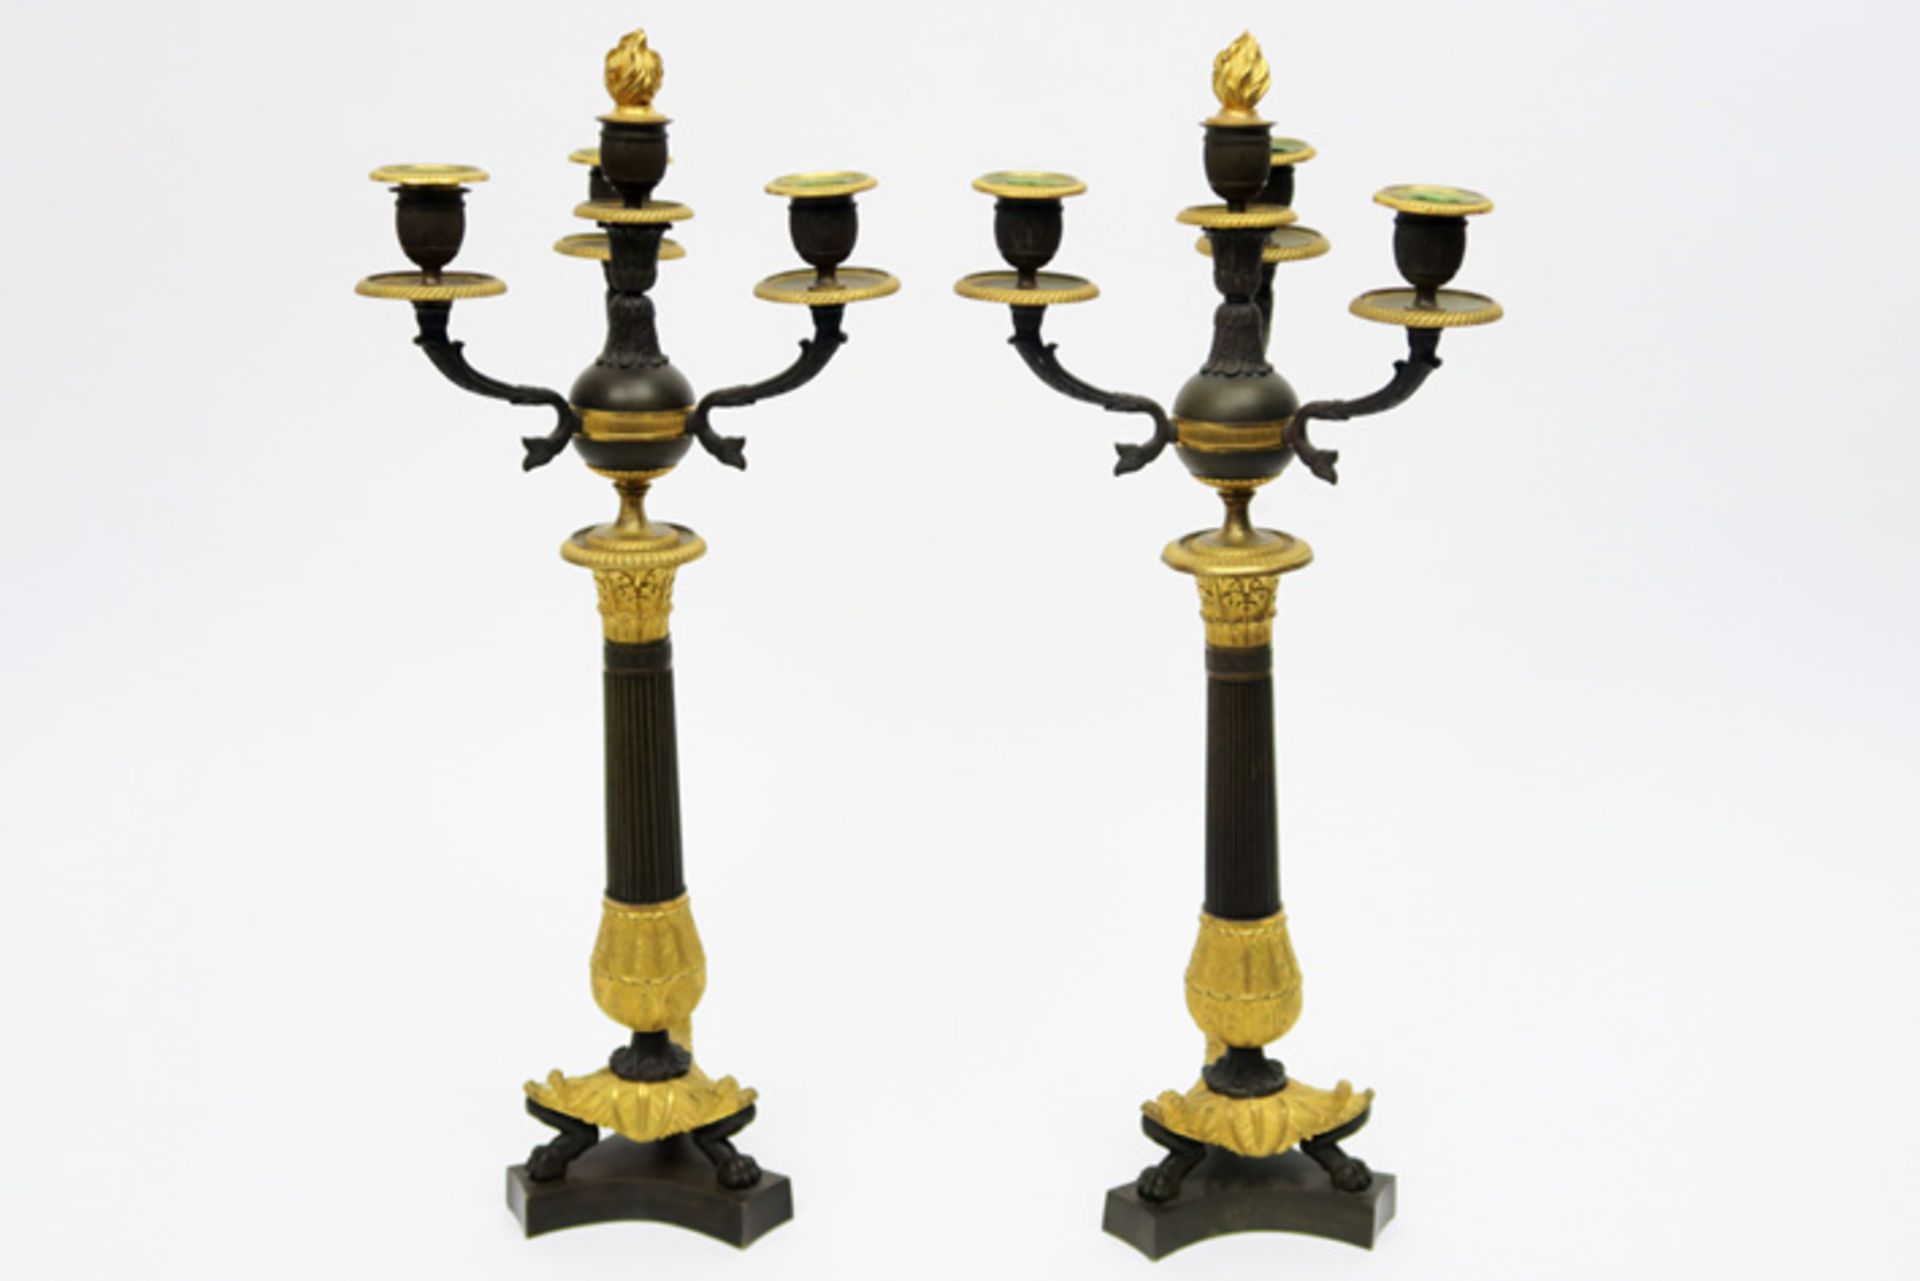 pair of antique, probably French Empire style candelabras partially dark brown patinated partially